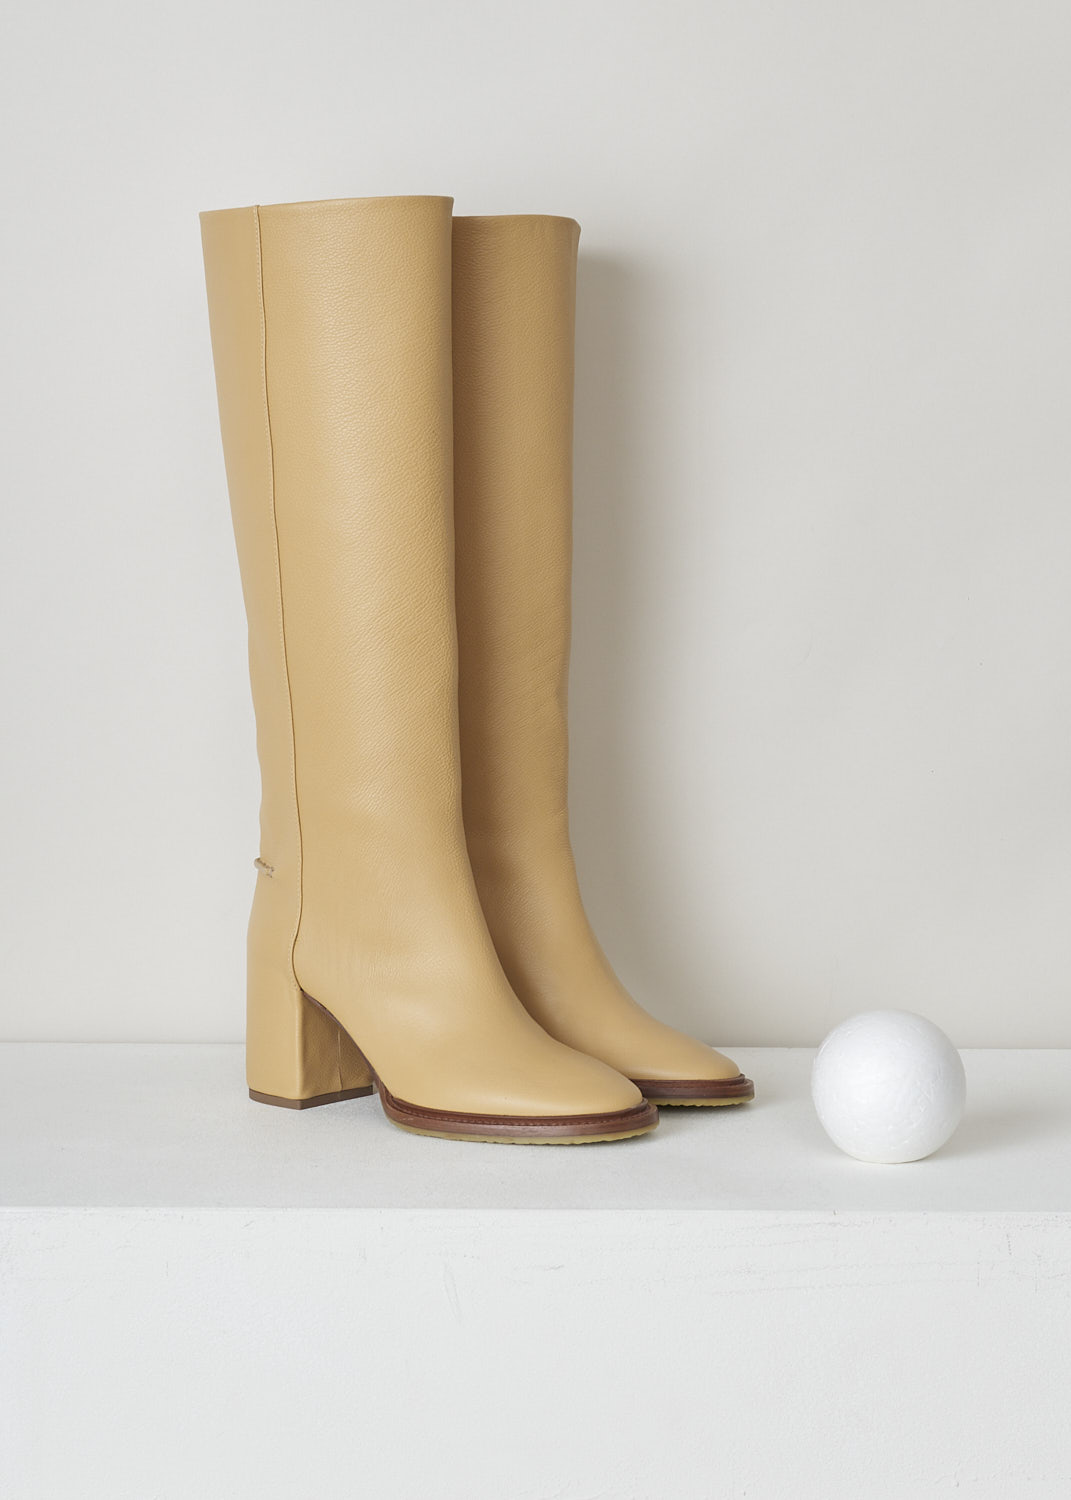 CHLOÉ, EDITH HEELED BOOTS IN SOFT TAN, CHC21W519V3275_EDITH_HEEL_BOOTS_SOFT_TAN, Beige, Front, These knee-high black leather slip-on boots have a blocked heel with stitched piping on the back shaft. The boots have a round toe and a contrasting brown sole.
